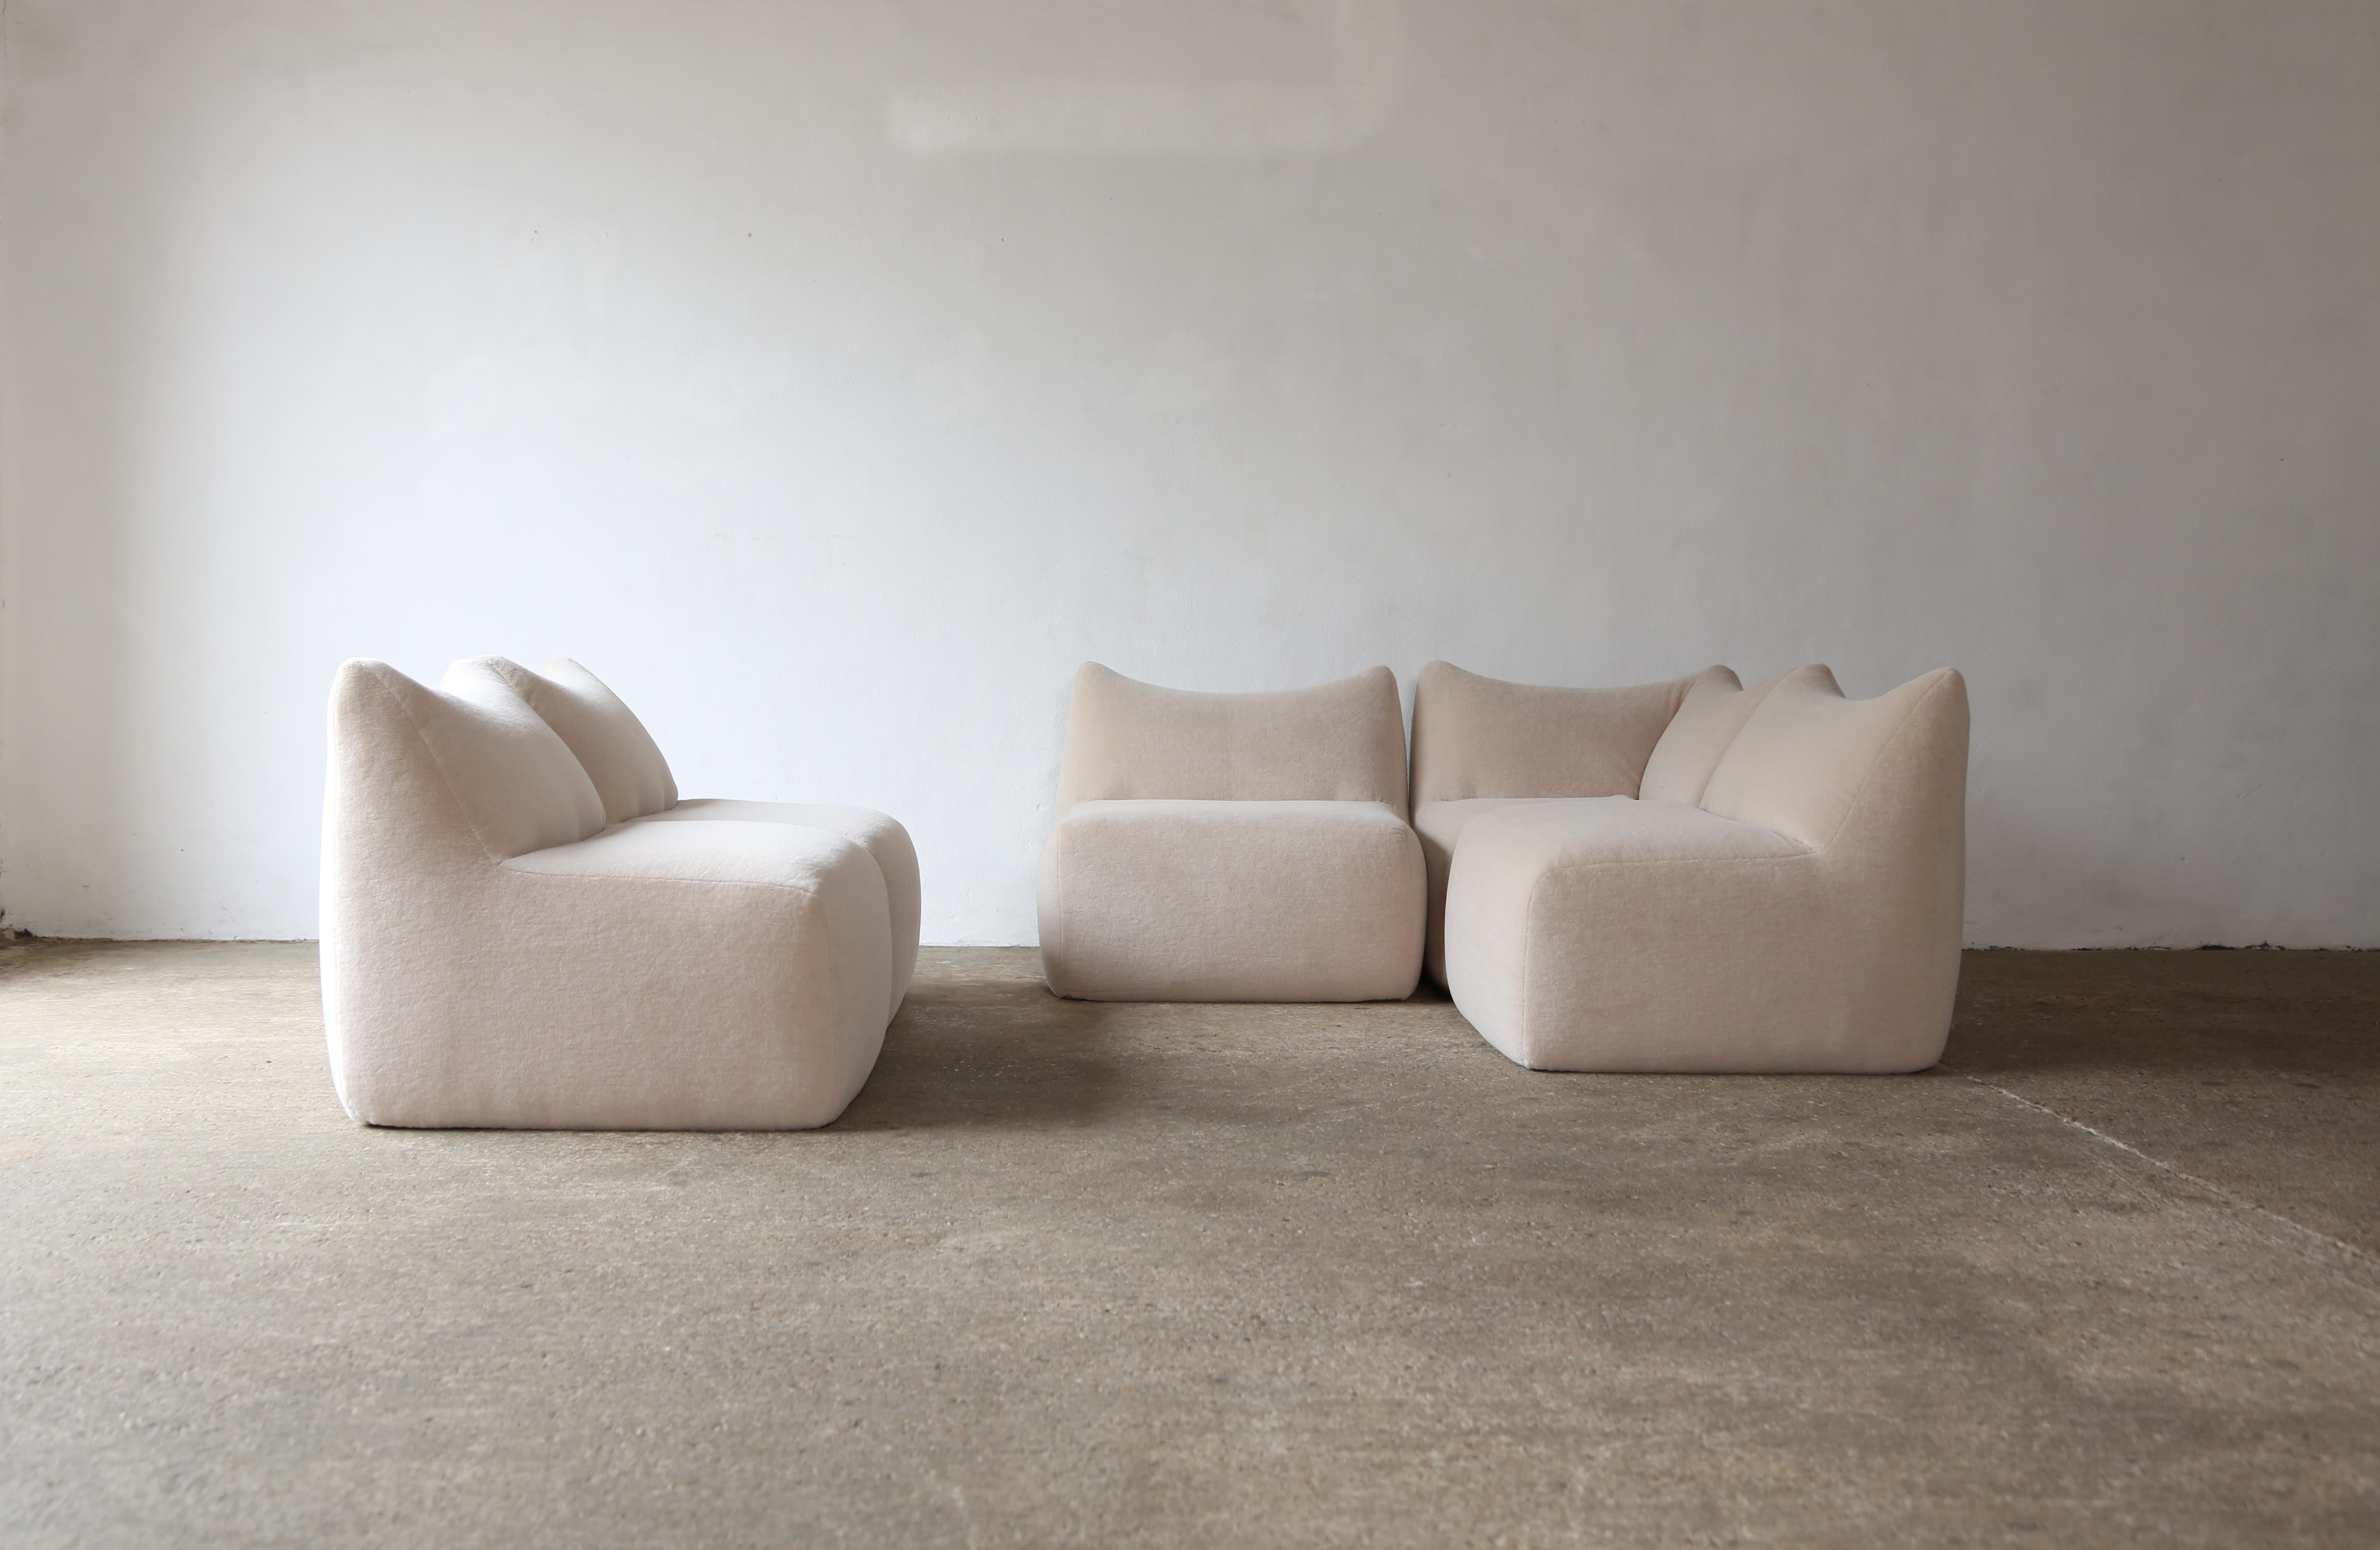 A Mario Bellini Le Bambole five piece modular sofa / chair set, produced by B&B Italia, Italy in the 1970s, newly upholstered in luxurious 100% alpaca. 

The pieces without arms each measure
H 73cm
D 88cm
W 80cm
SH 40/41cm

The piece with arms